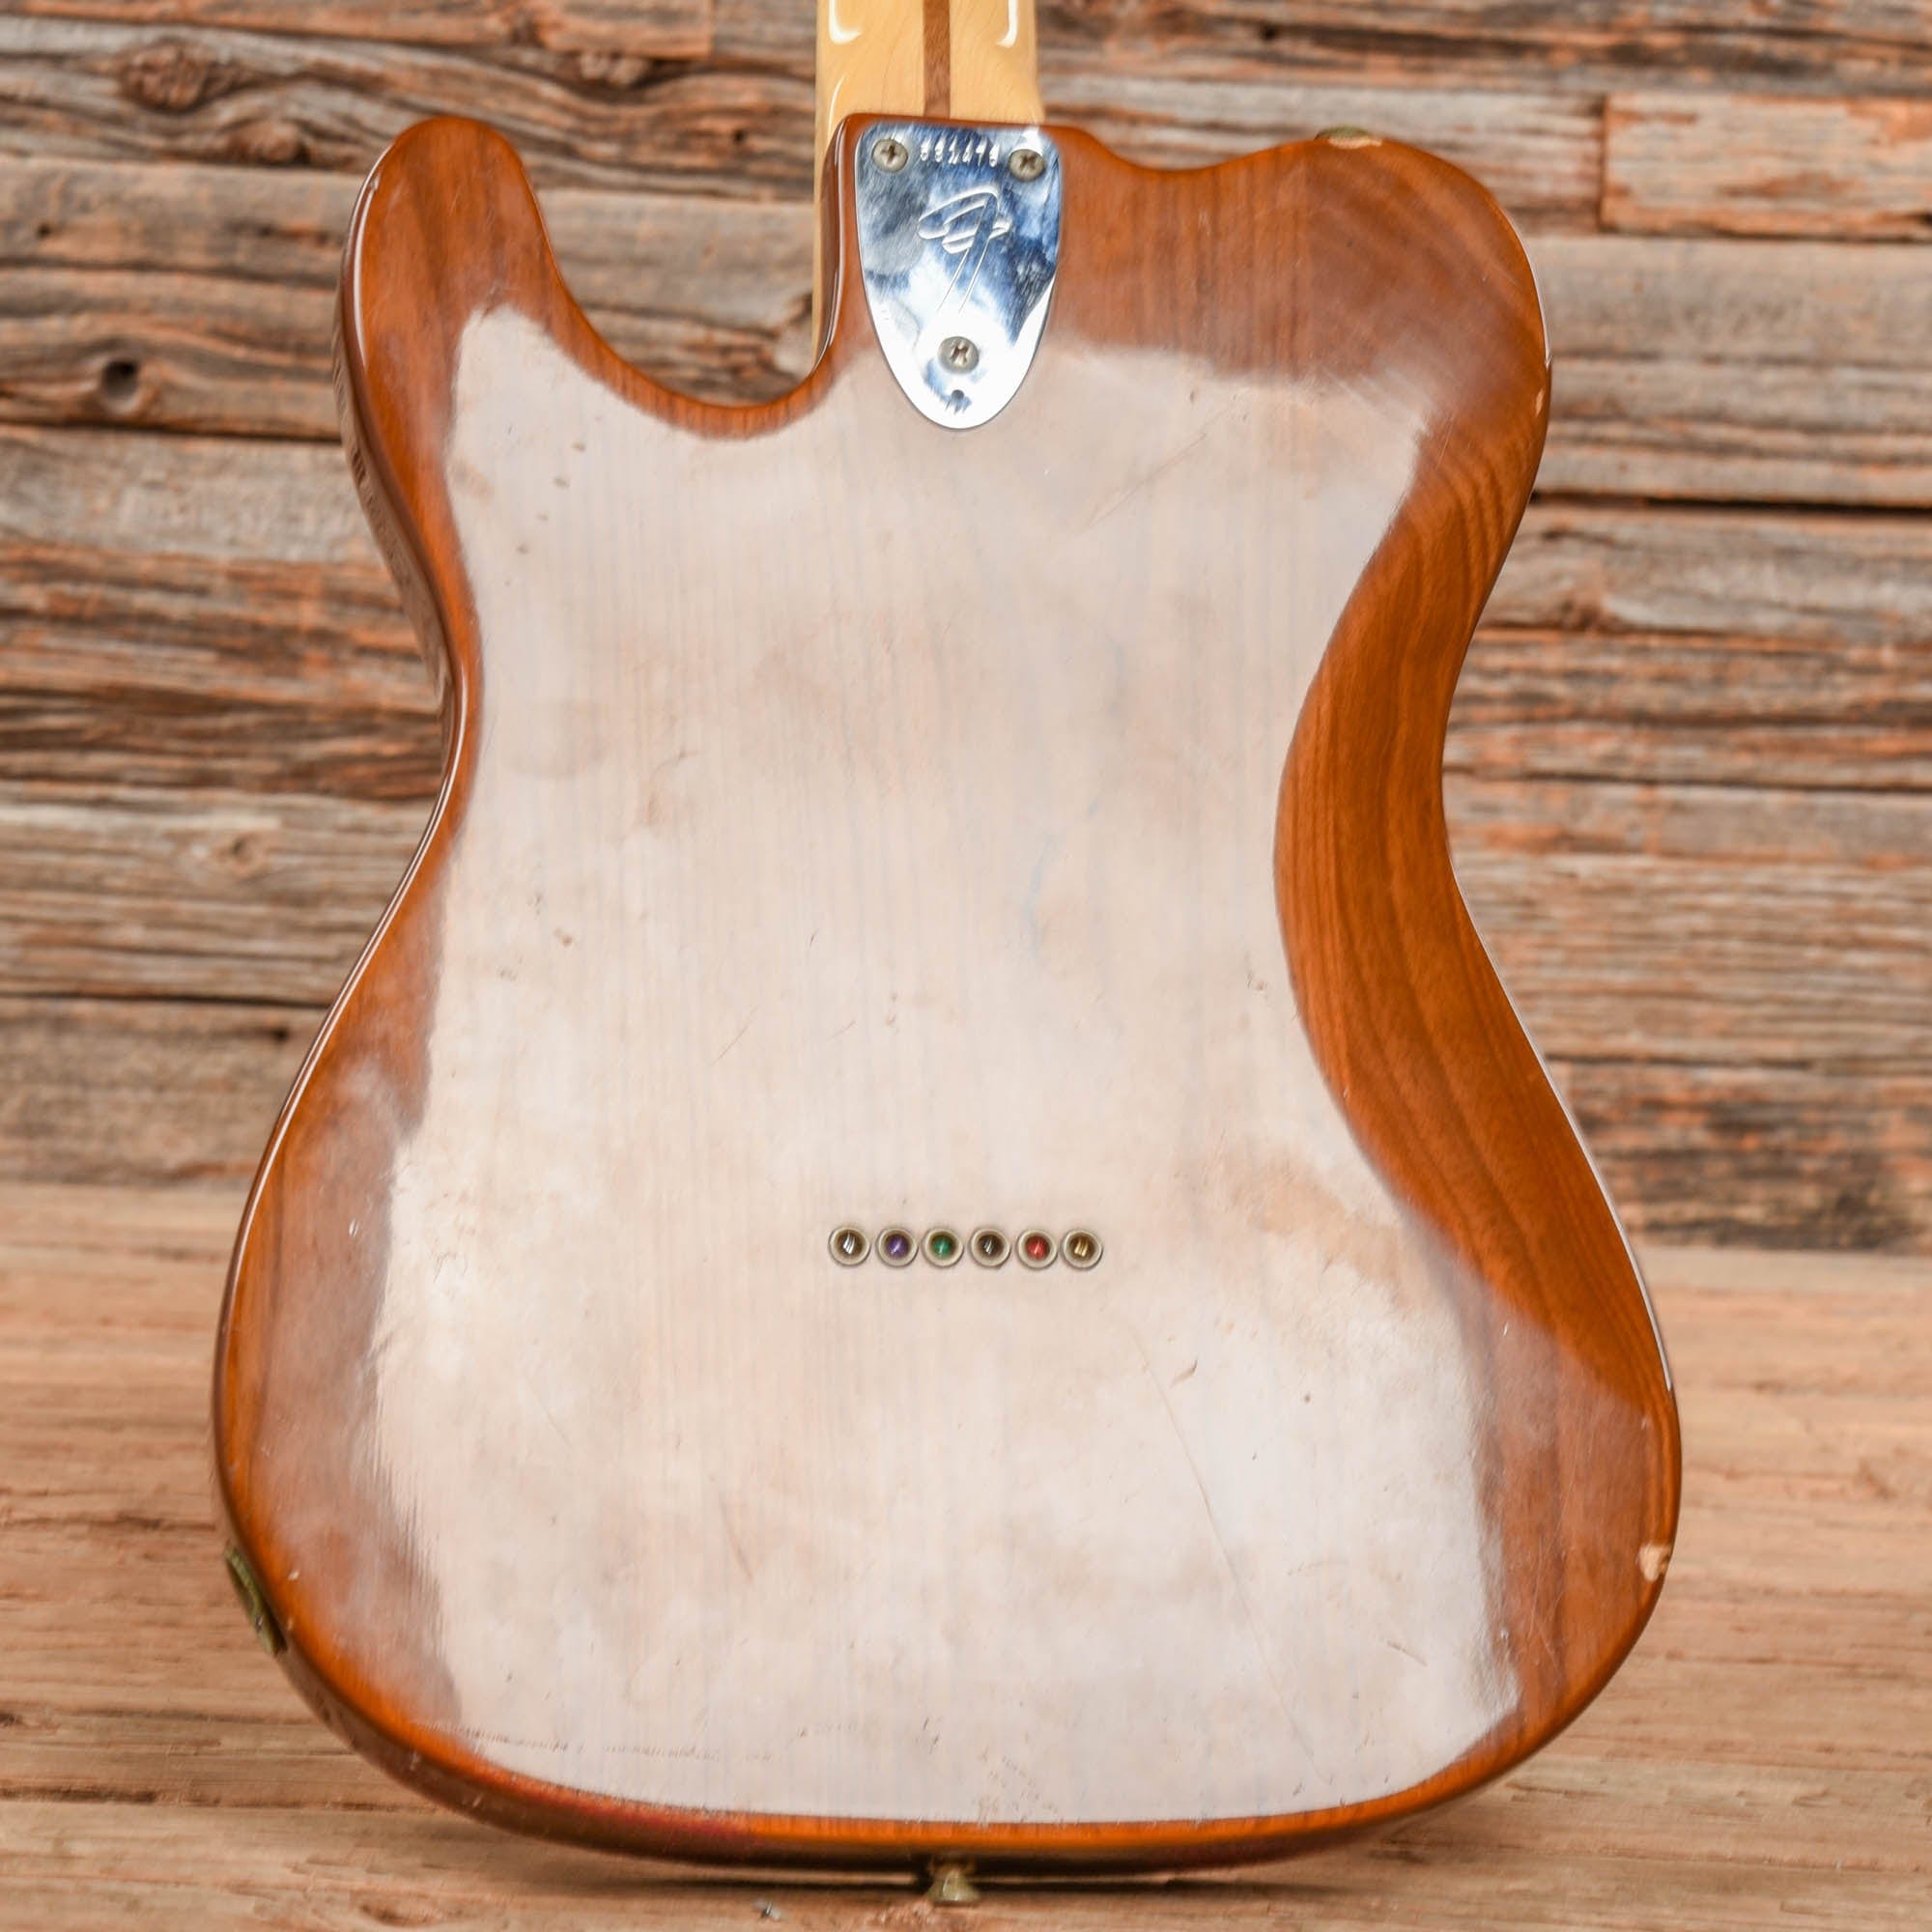 Fender Telecaster Deluxe Walnut 1974 Electric Guitars / Solid Body